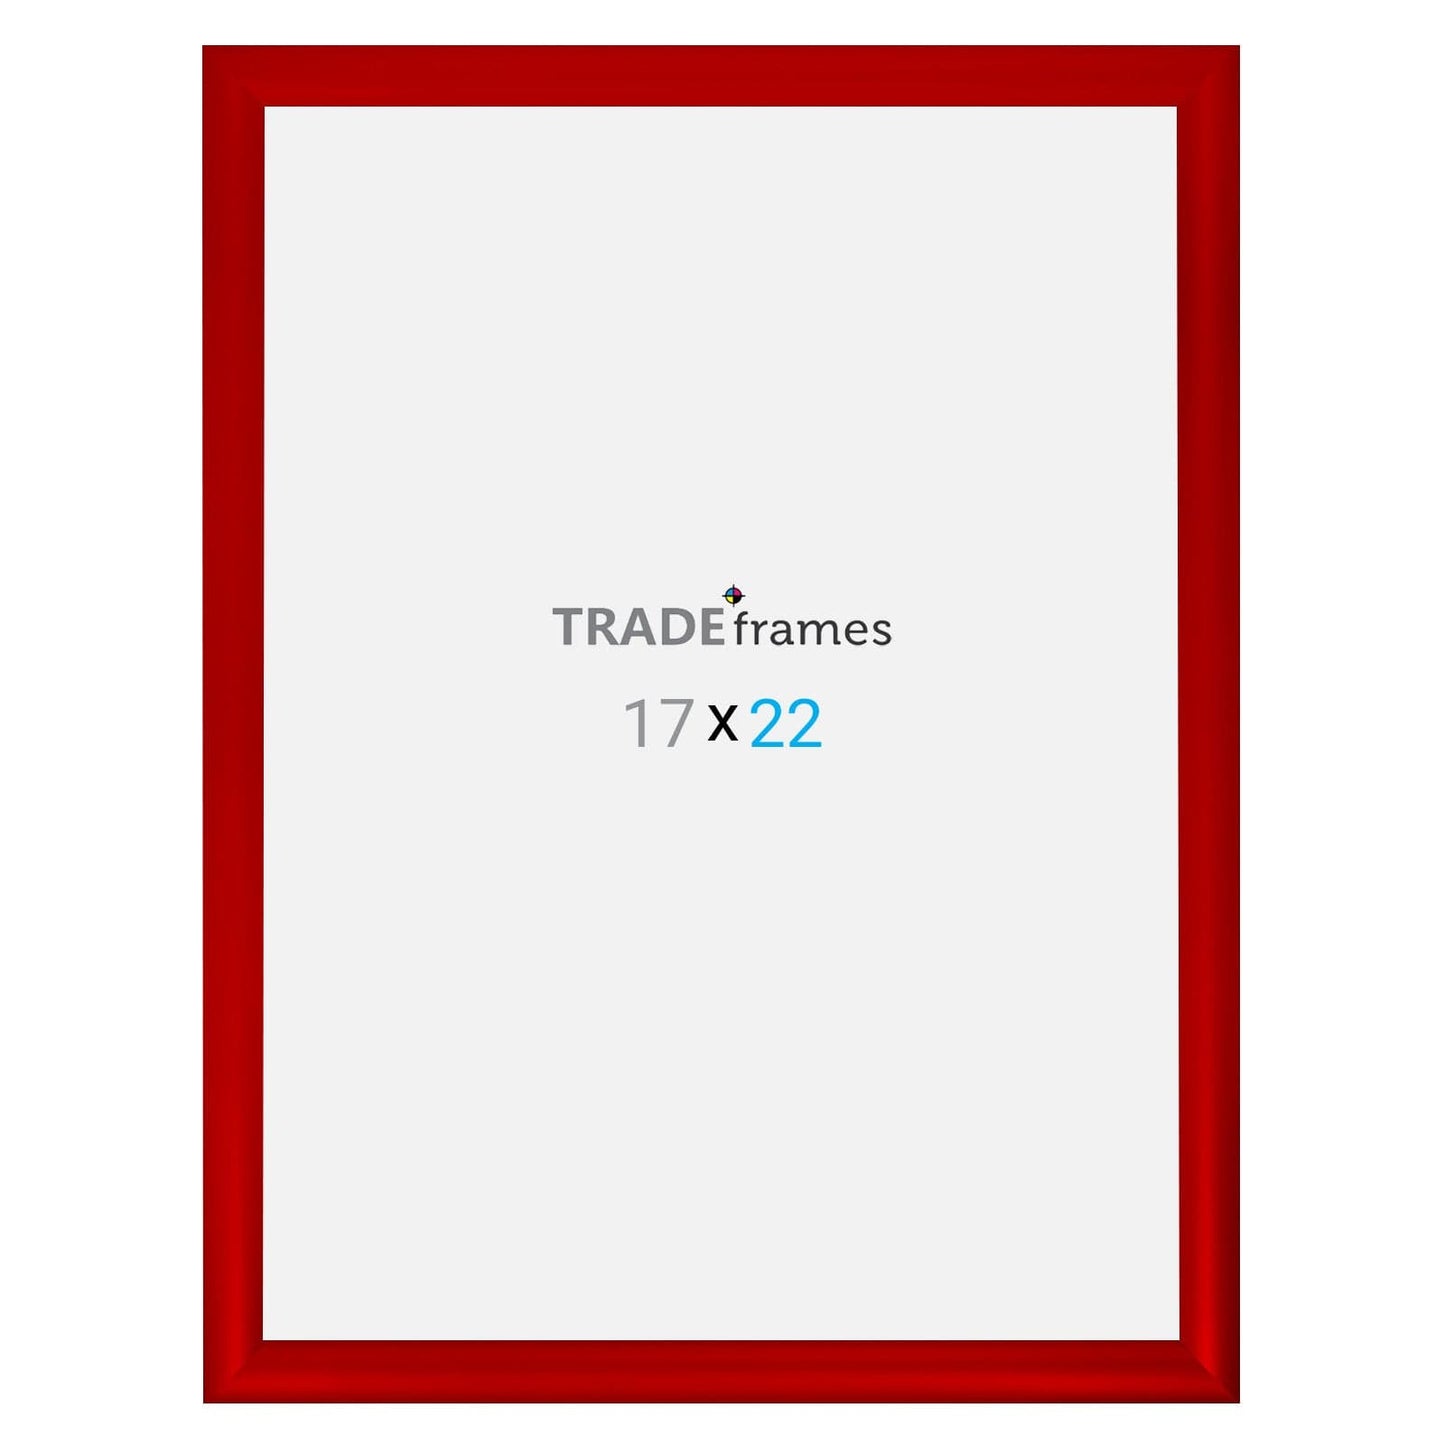 17x22 Red Snap Frame 17x22 - 1.2 inch profile - Snap Frames Direct